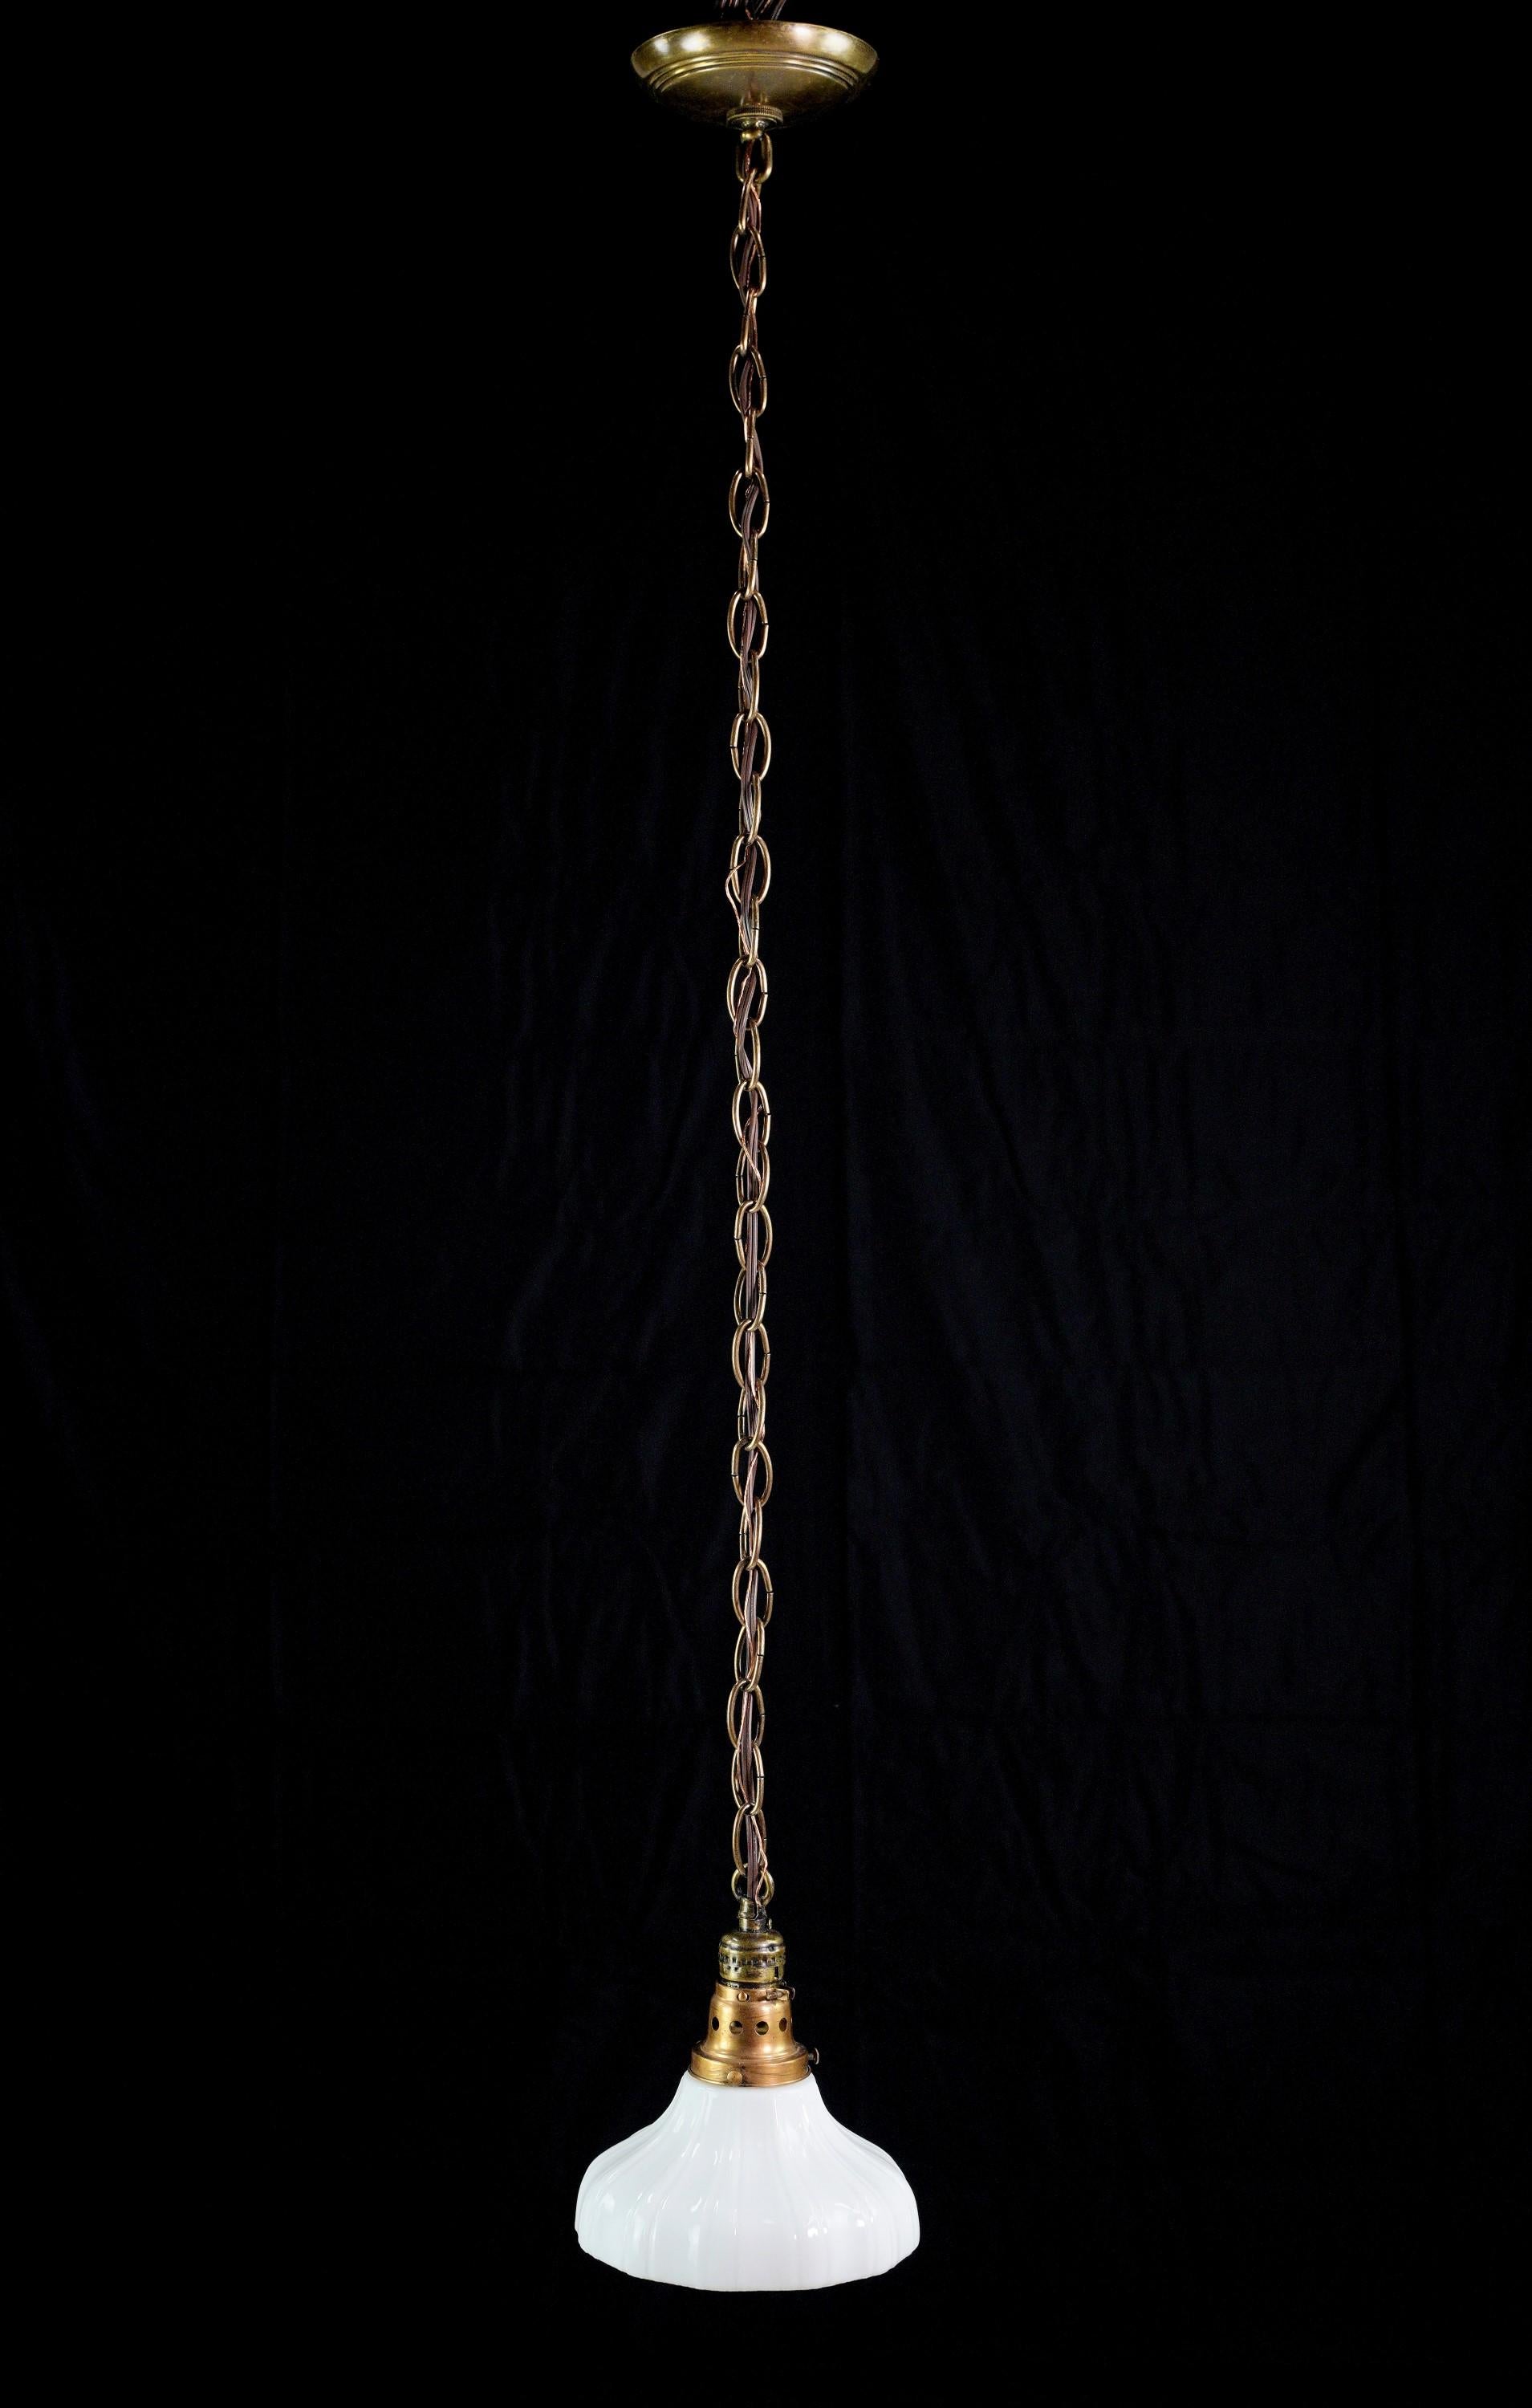 Antique white milk glass pendant light with a newly made brass fitter, canopy and steel chain. Cleaned and restored. This has one single standard medium base socket. Small quantity available at time of posting. Please inquire. Priced each. Please